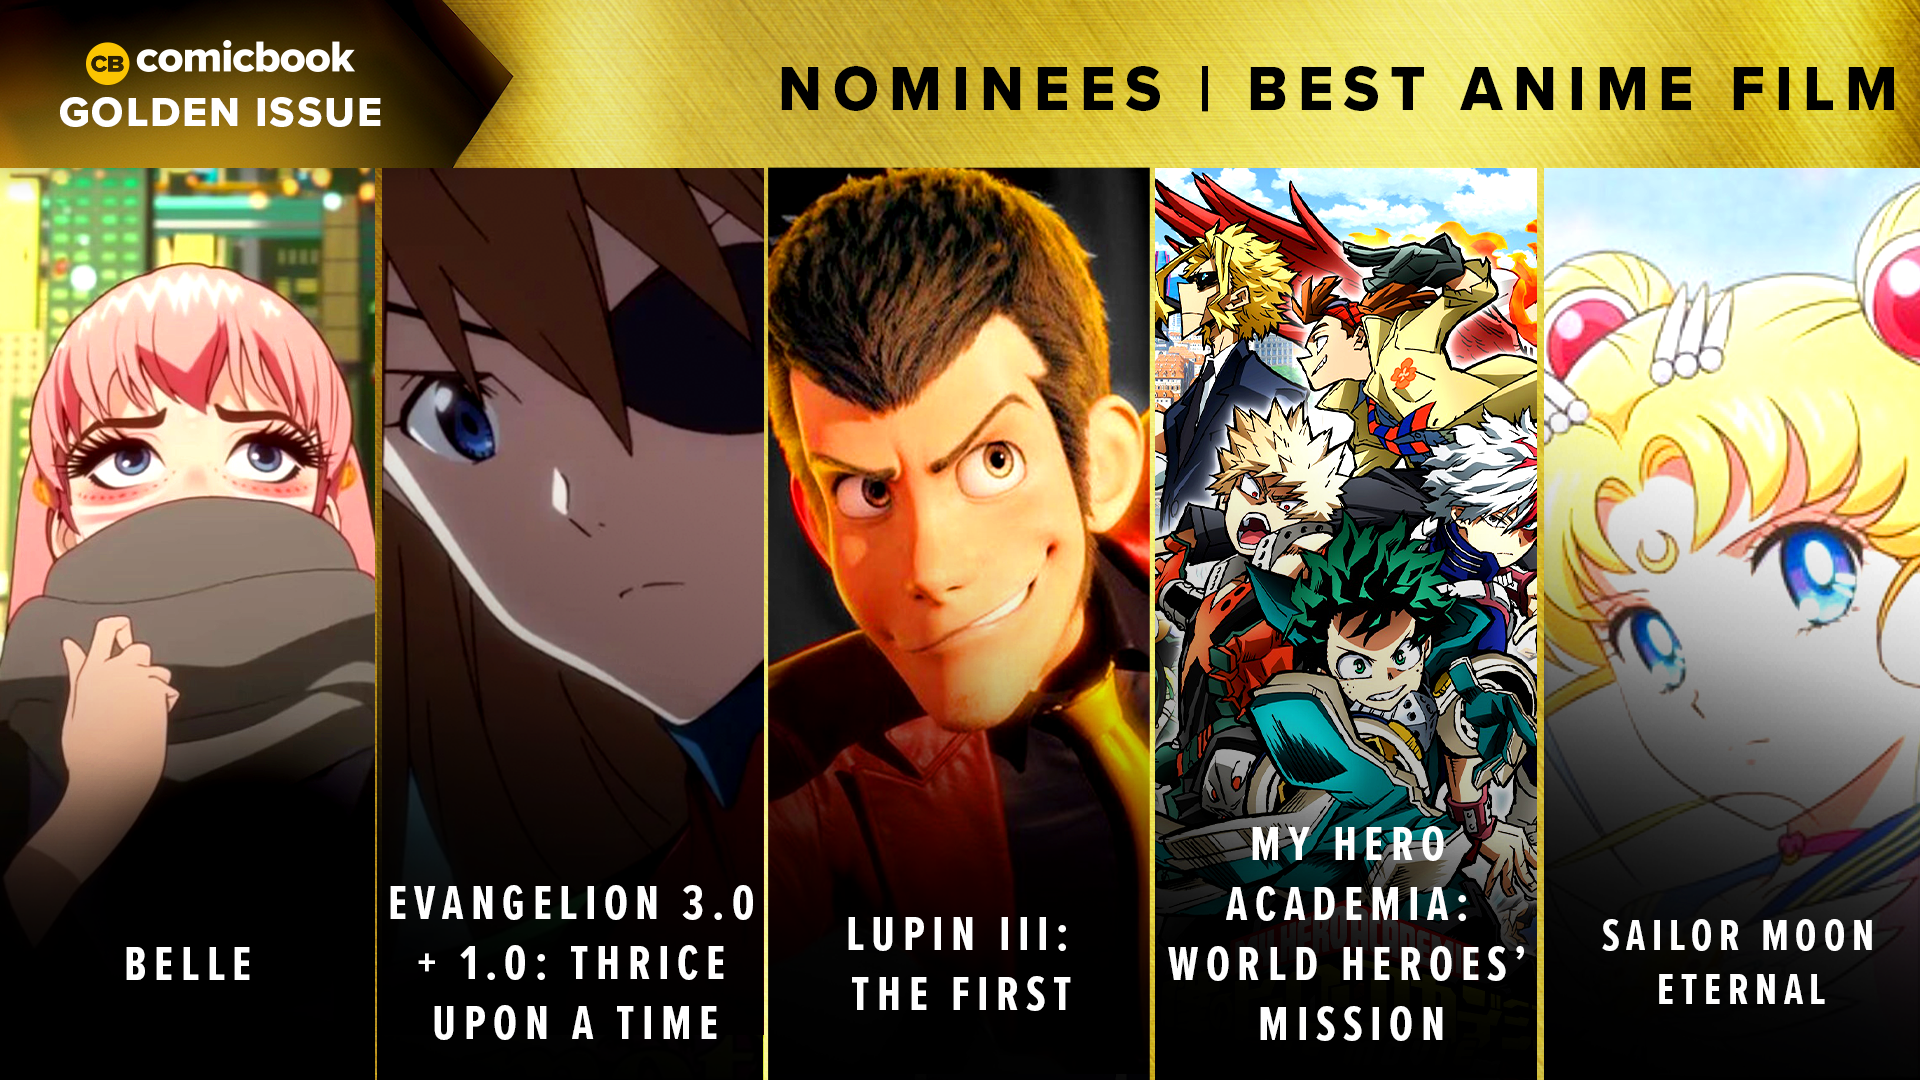 golden-issues-2021-nominees-best-anime-film.png